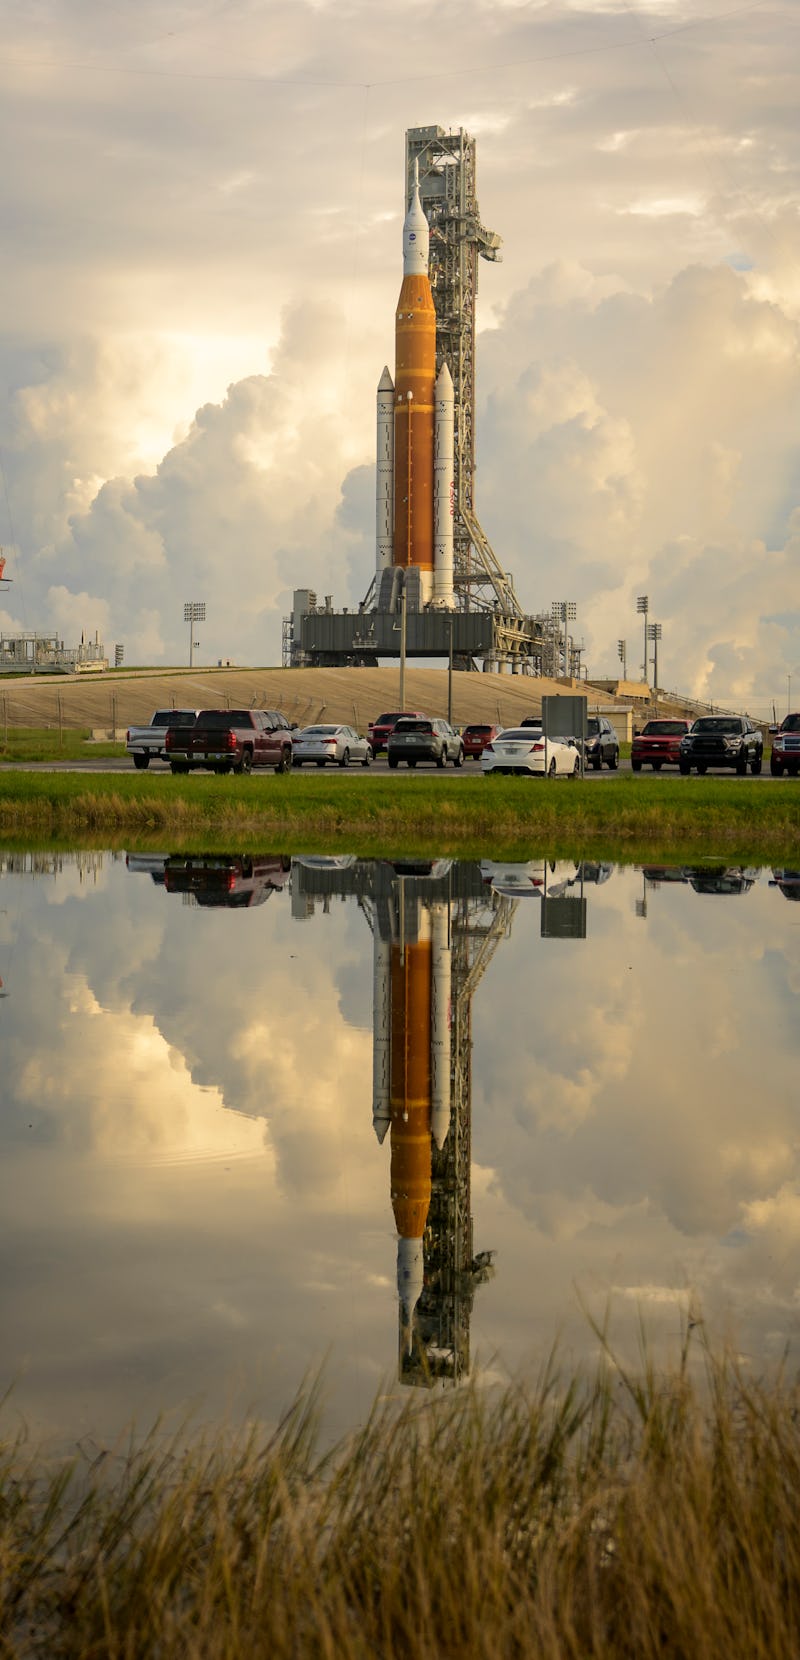 CAPE CANAVERAL, FLORIDA - SEPTEMBER 2: In this handout image provided by NASA, NASA's Space Launch S...